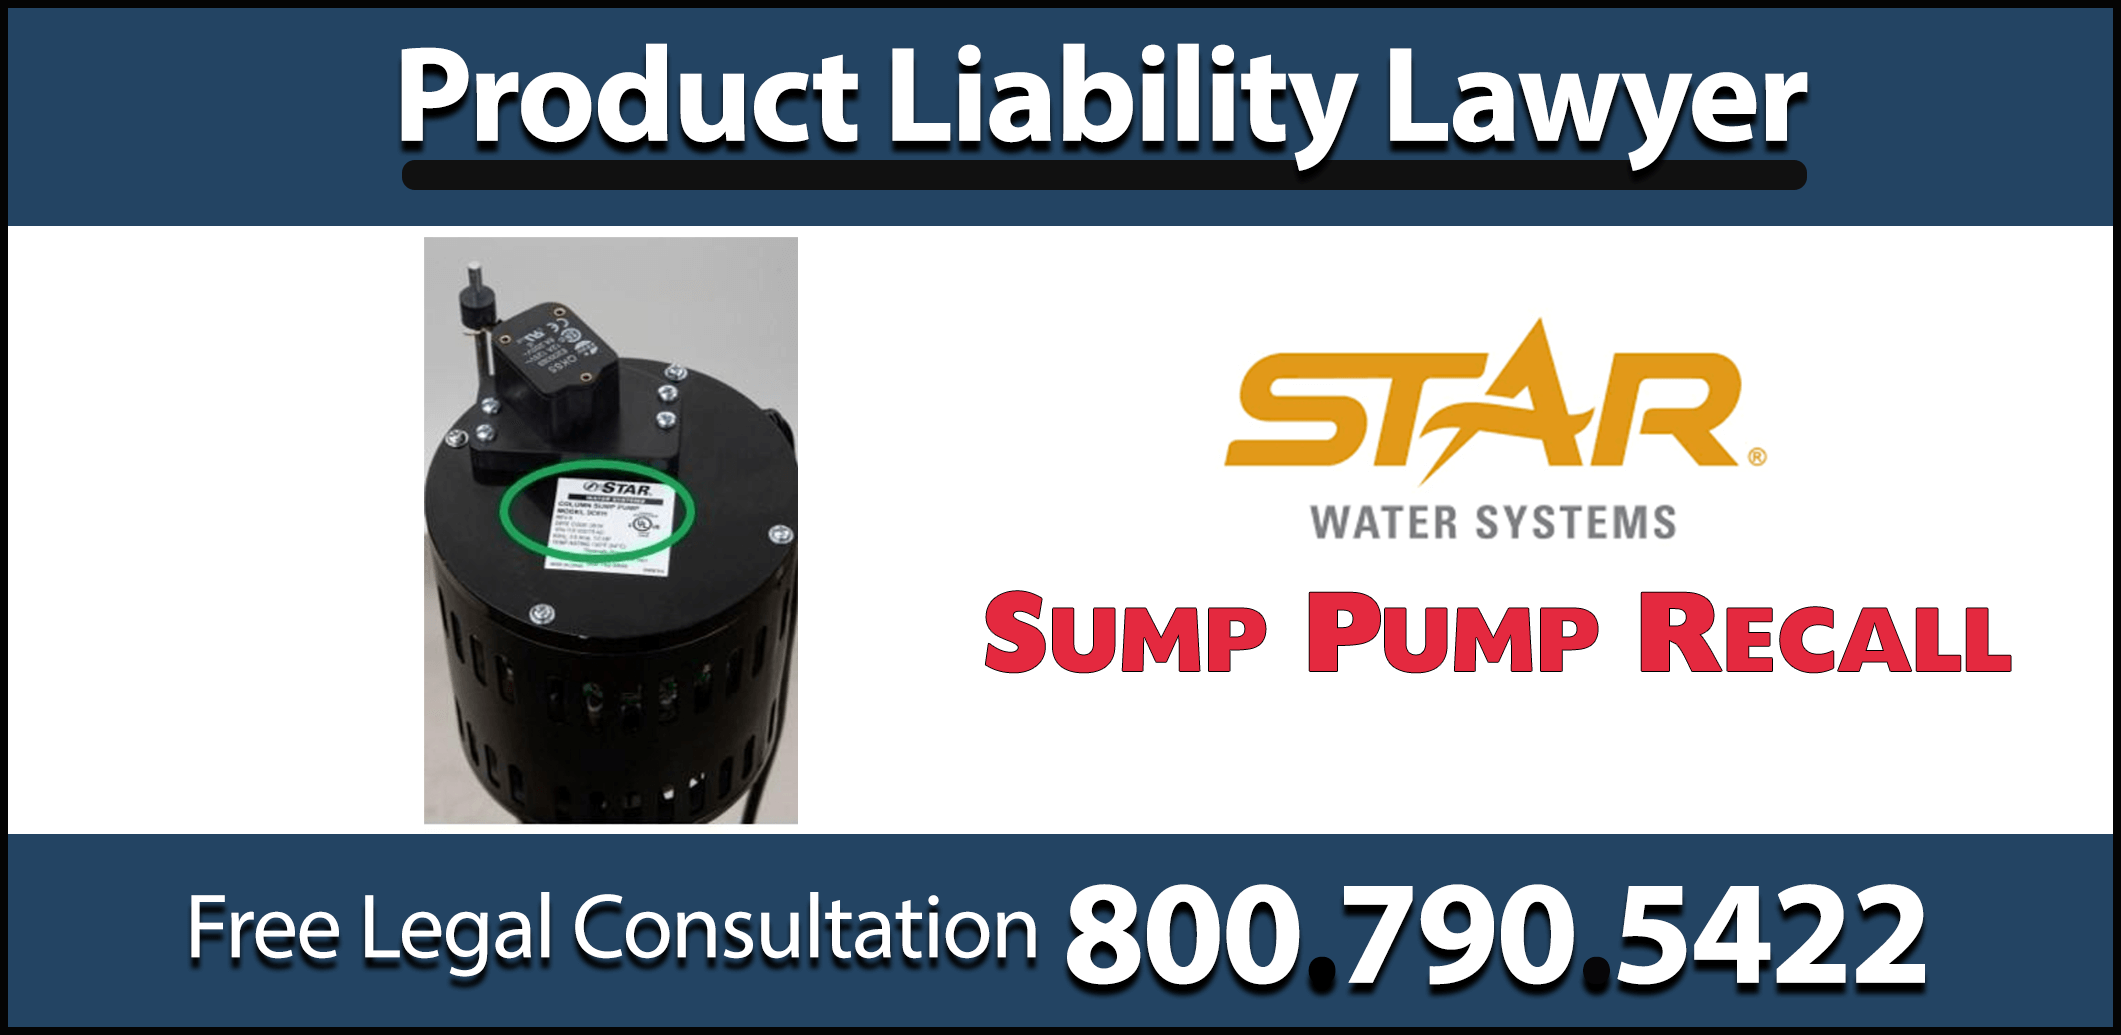 staw water systems recall product liability lawyer compensation sue attorney defective injury medical bills attorney sue